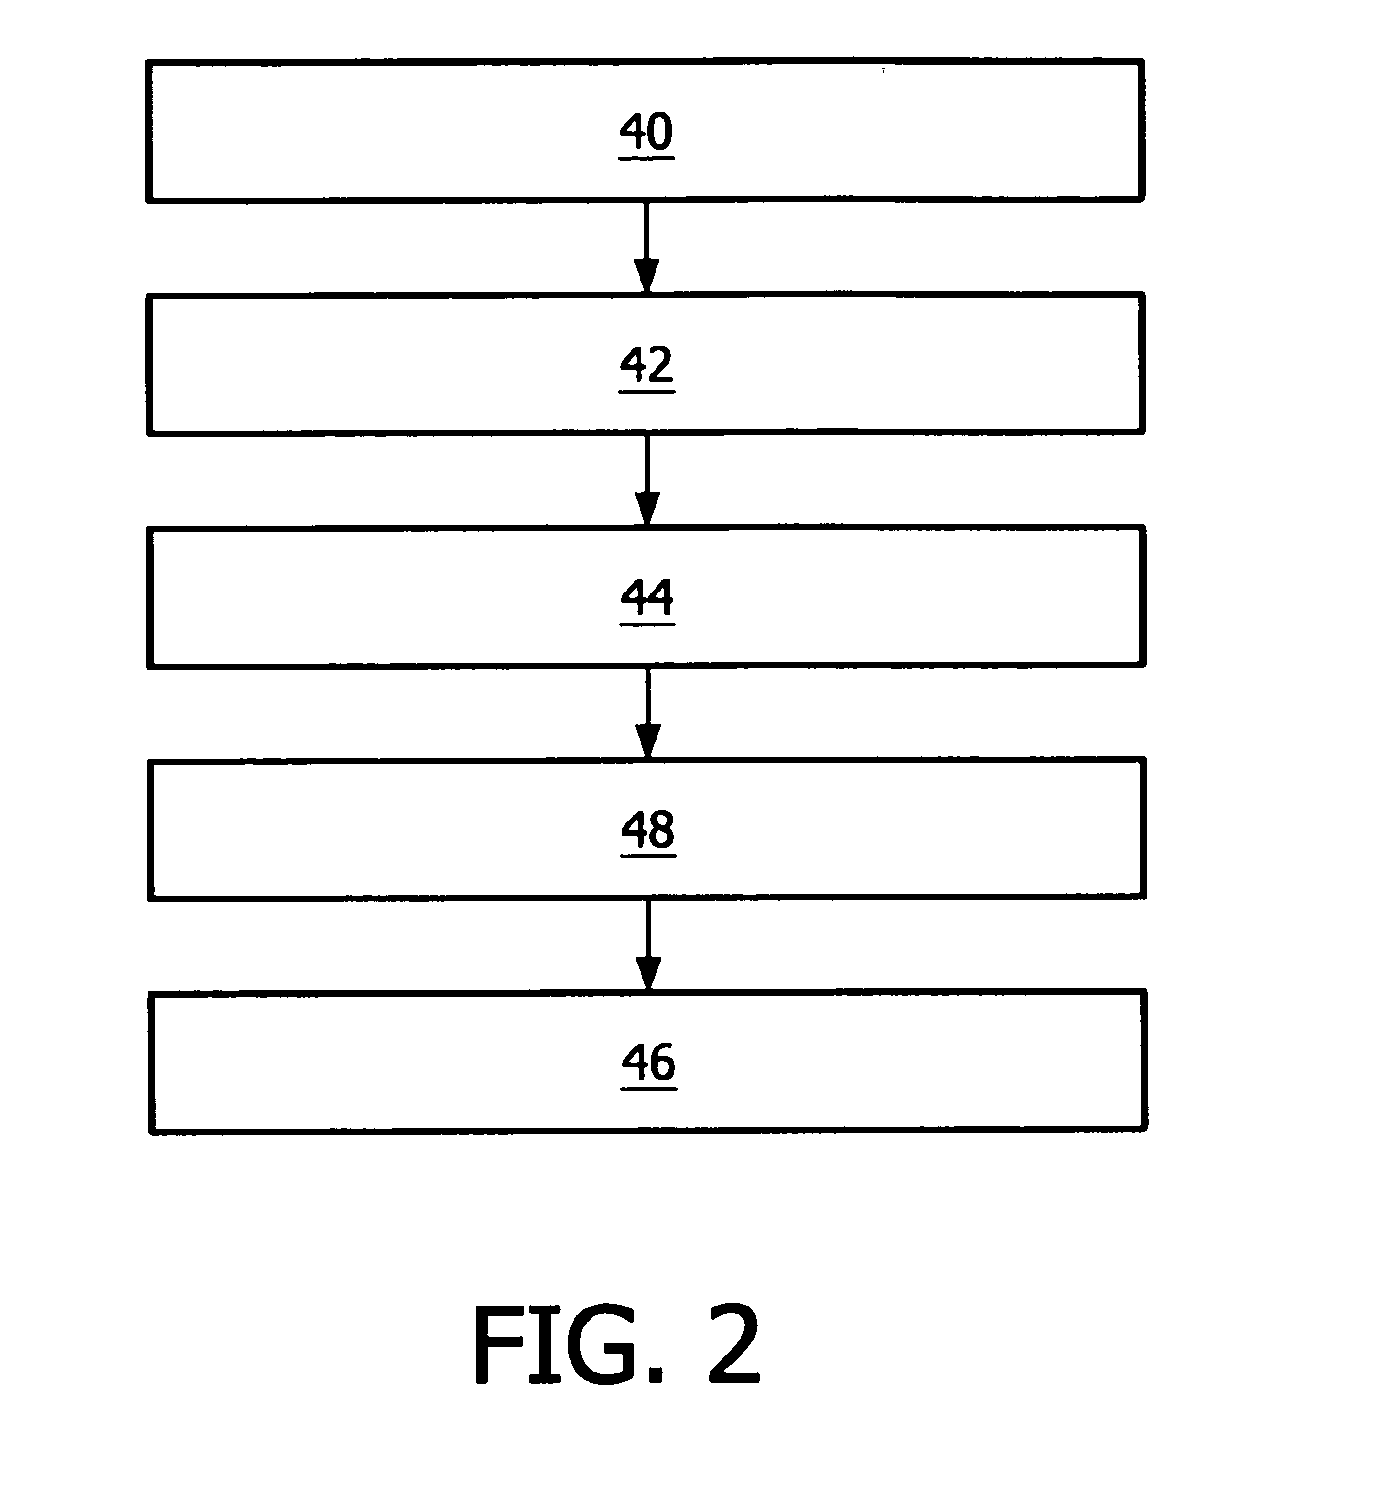 Apparatus and method for generating countable pulses from impinging X-ray photons; and corresponding imaging device